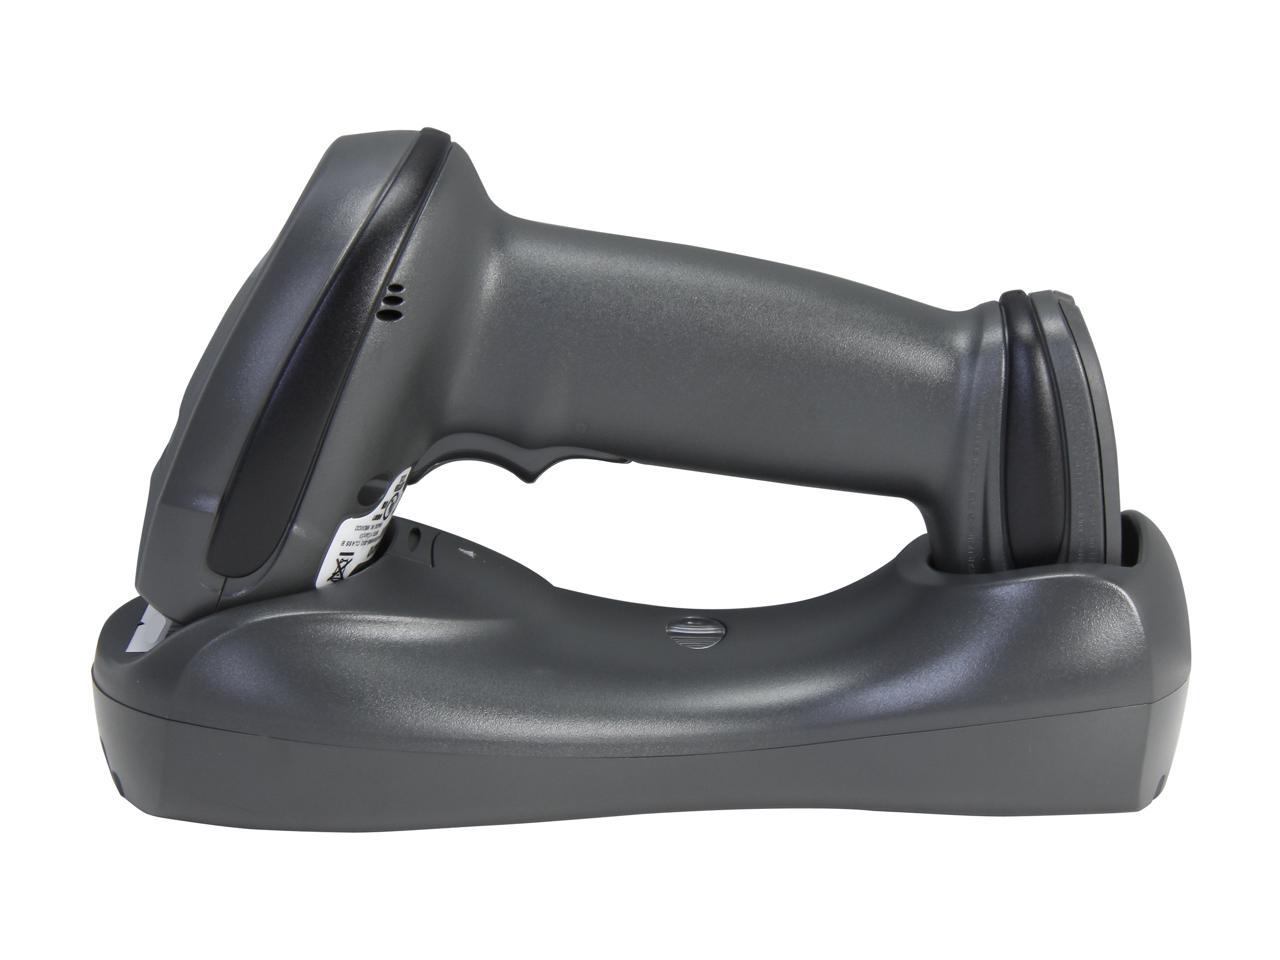 LI4278 Wireless 1D Barcode Scanner Zebra Symbol with Cradle and USB Cable Formerly Motorola Symbol